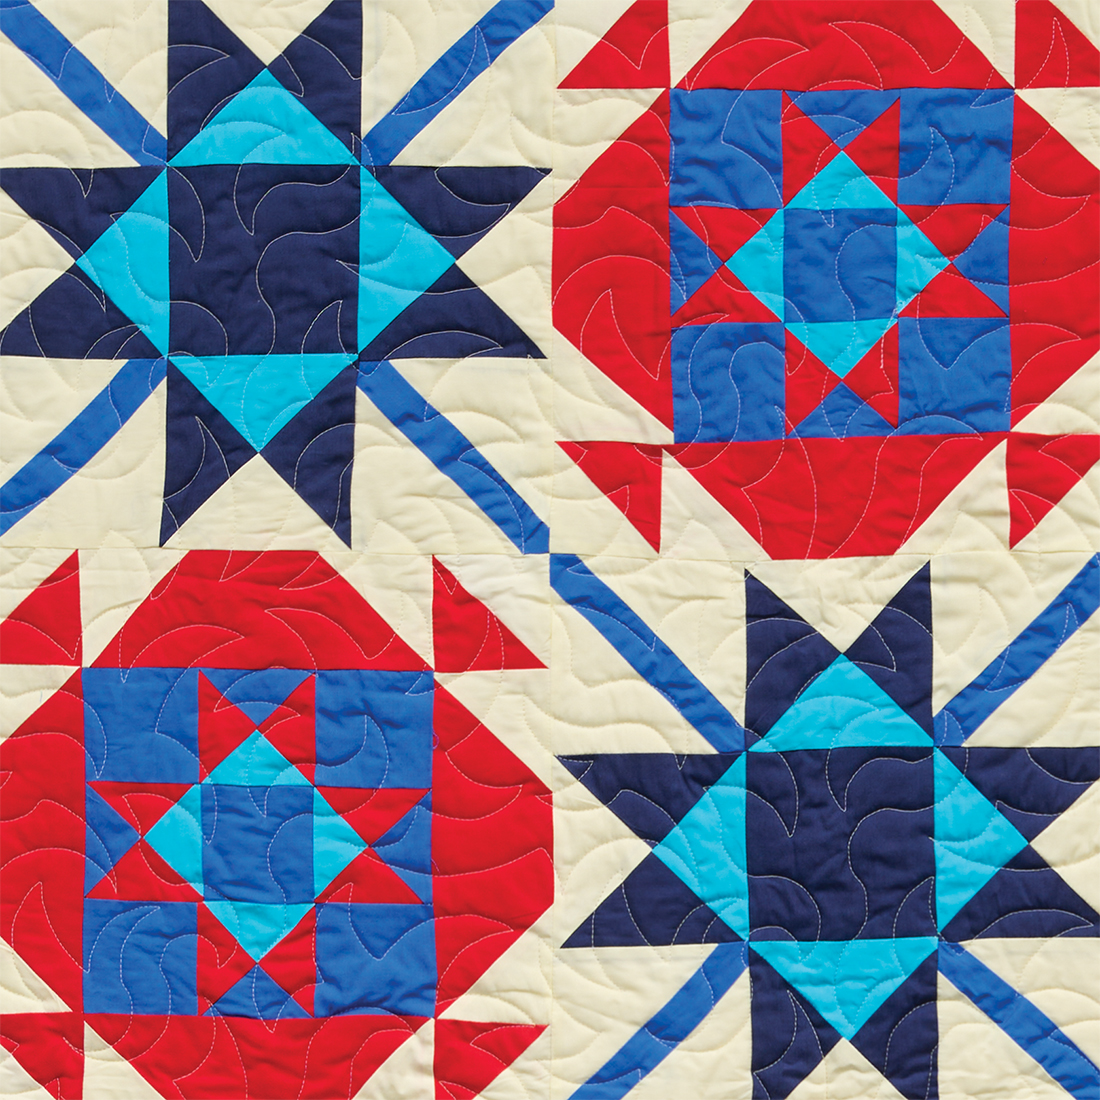 Fireworks quilt block in red, white, and blue fabrics.